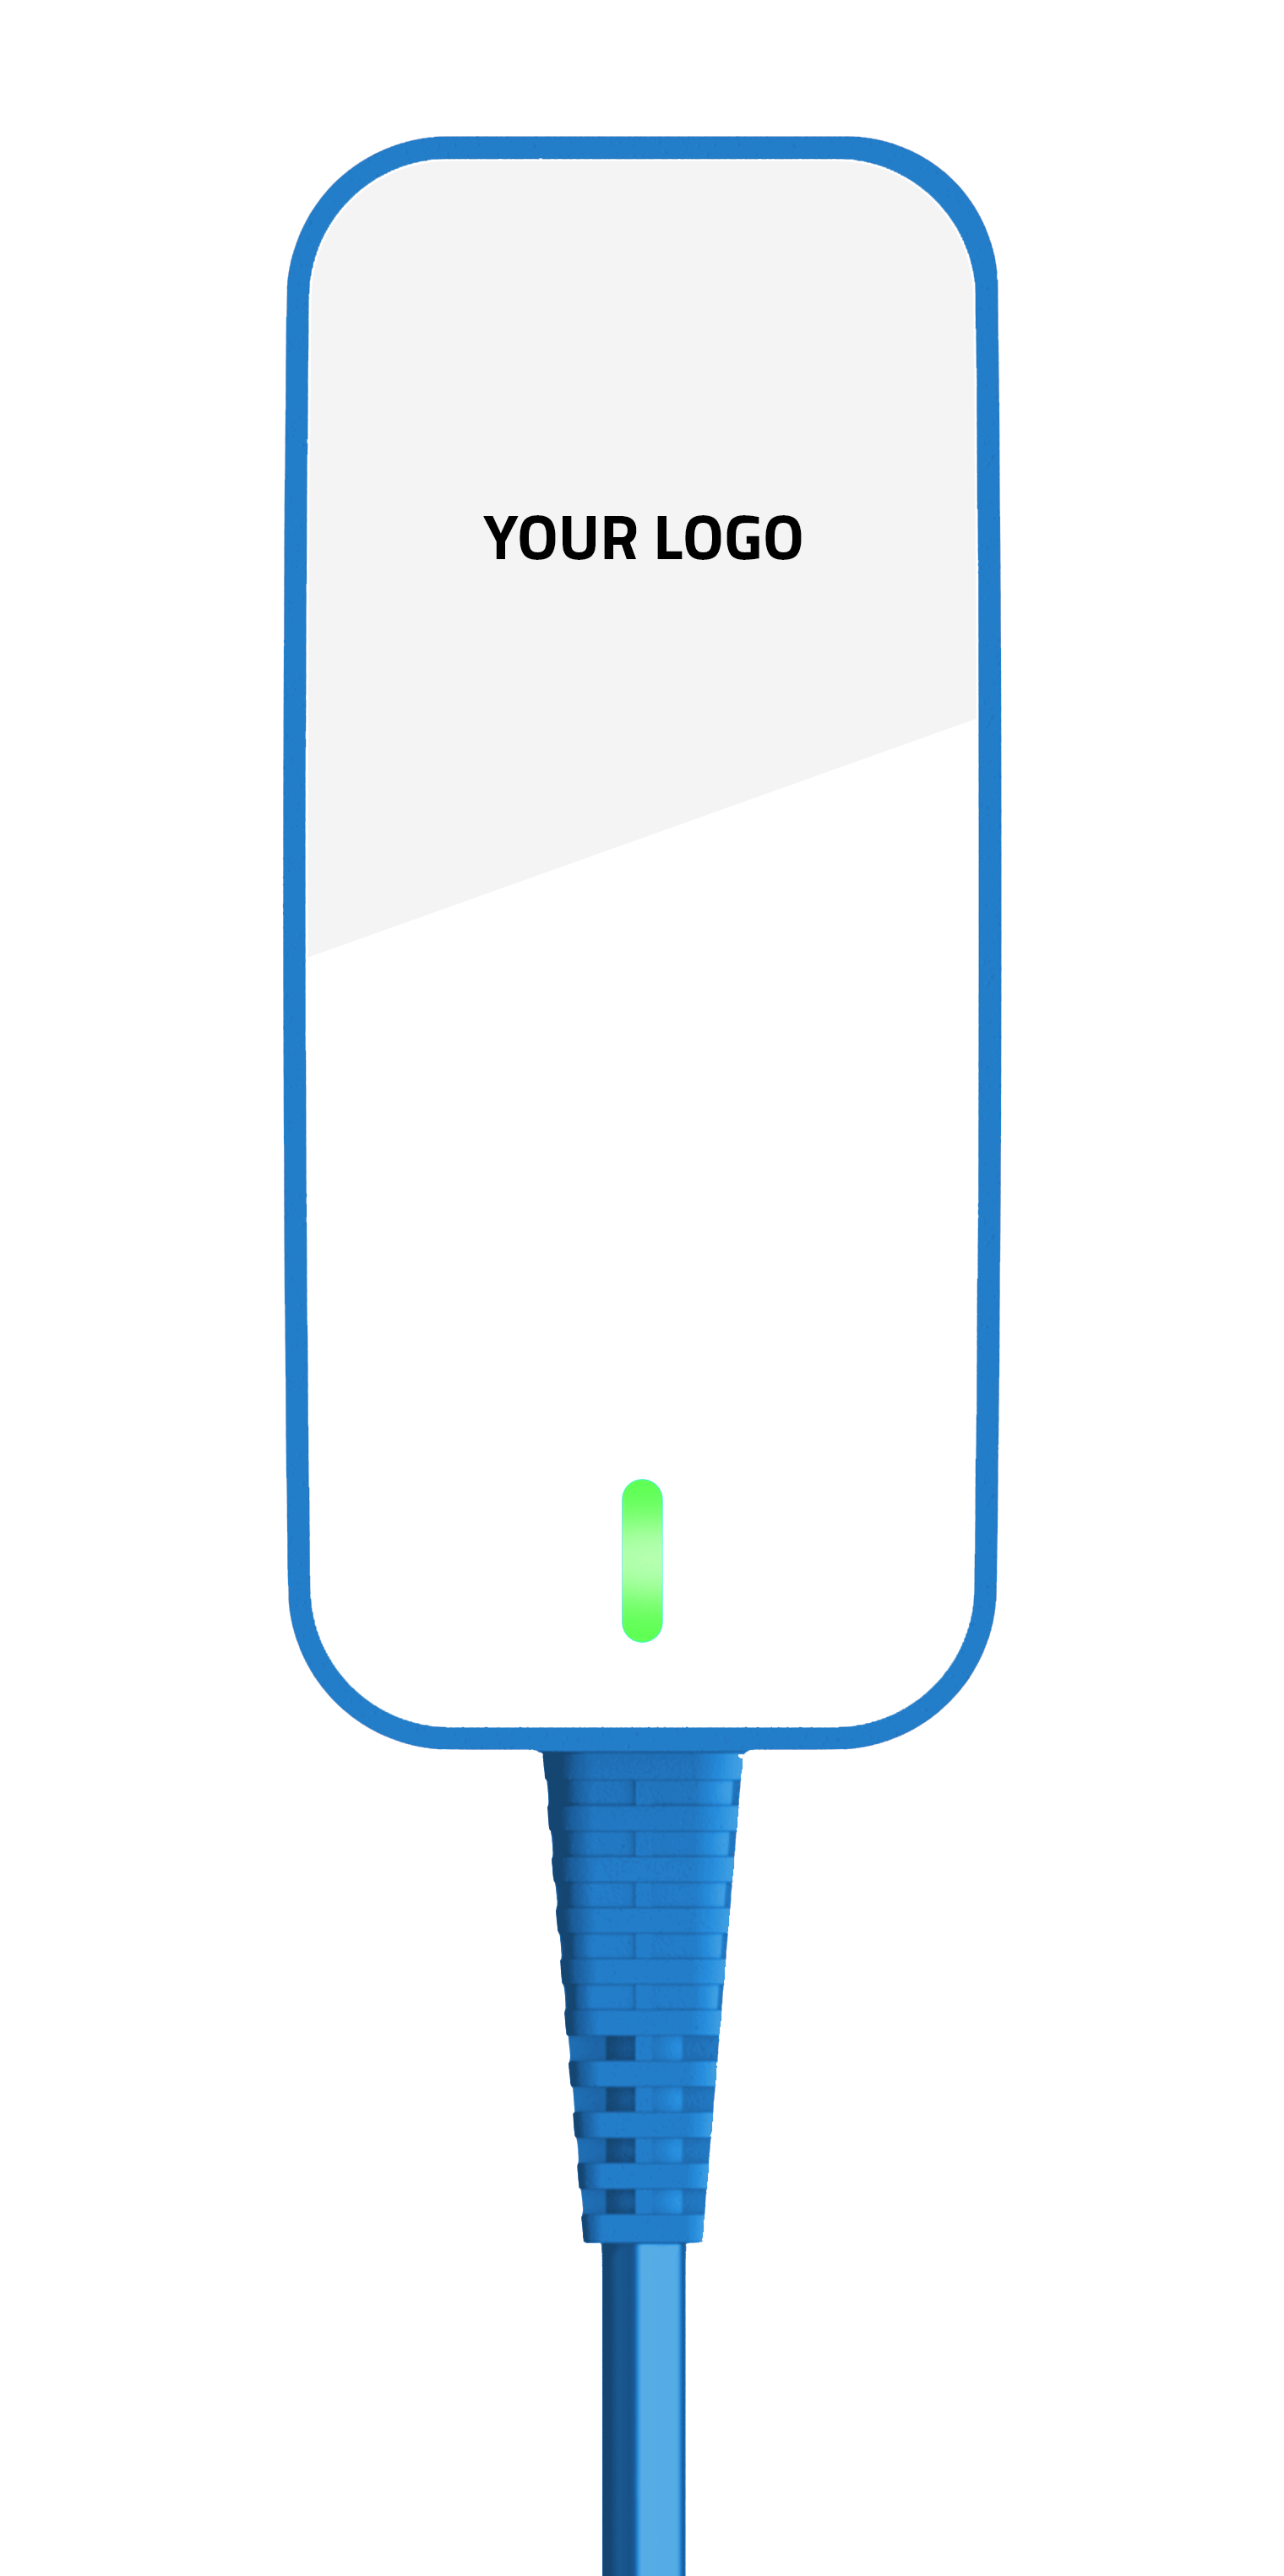 A white power supply charger with a green light on it and blue trim.